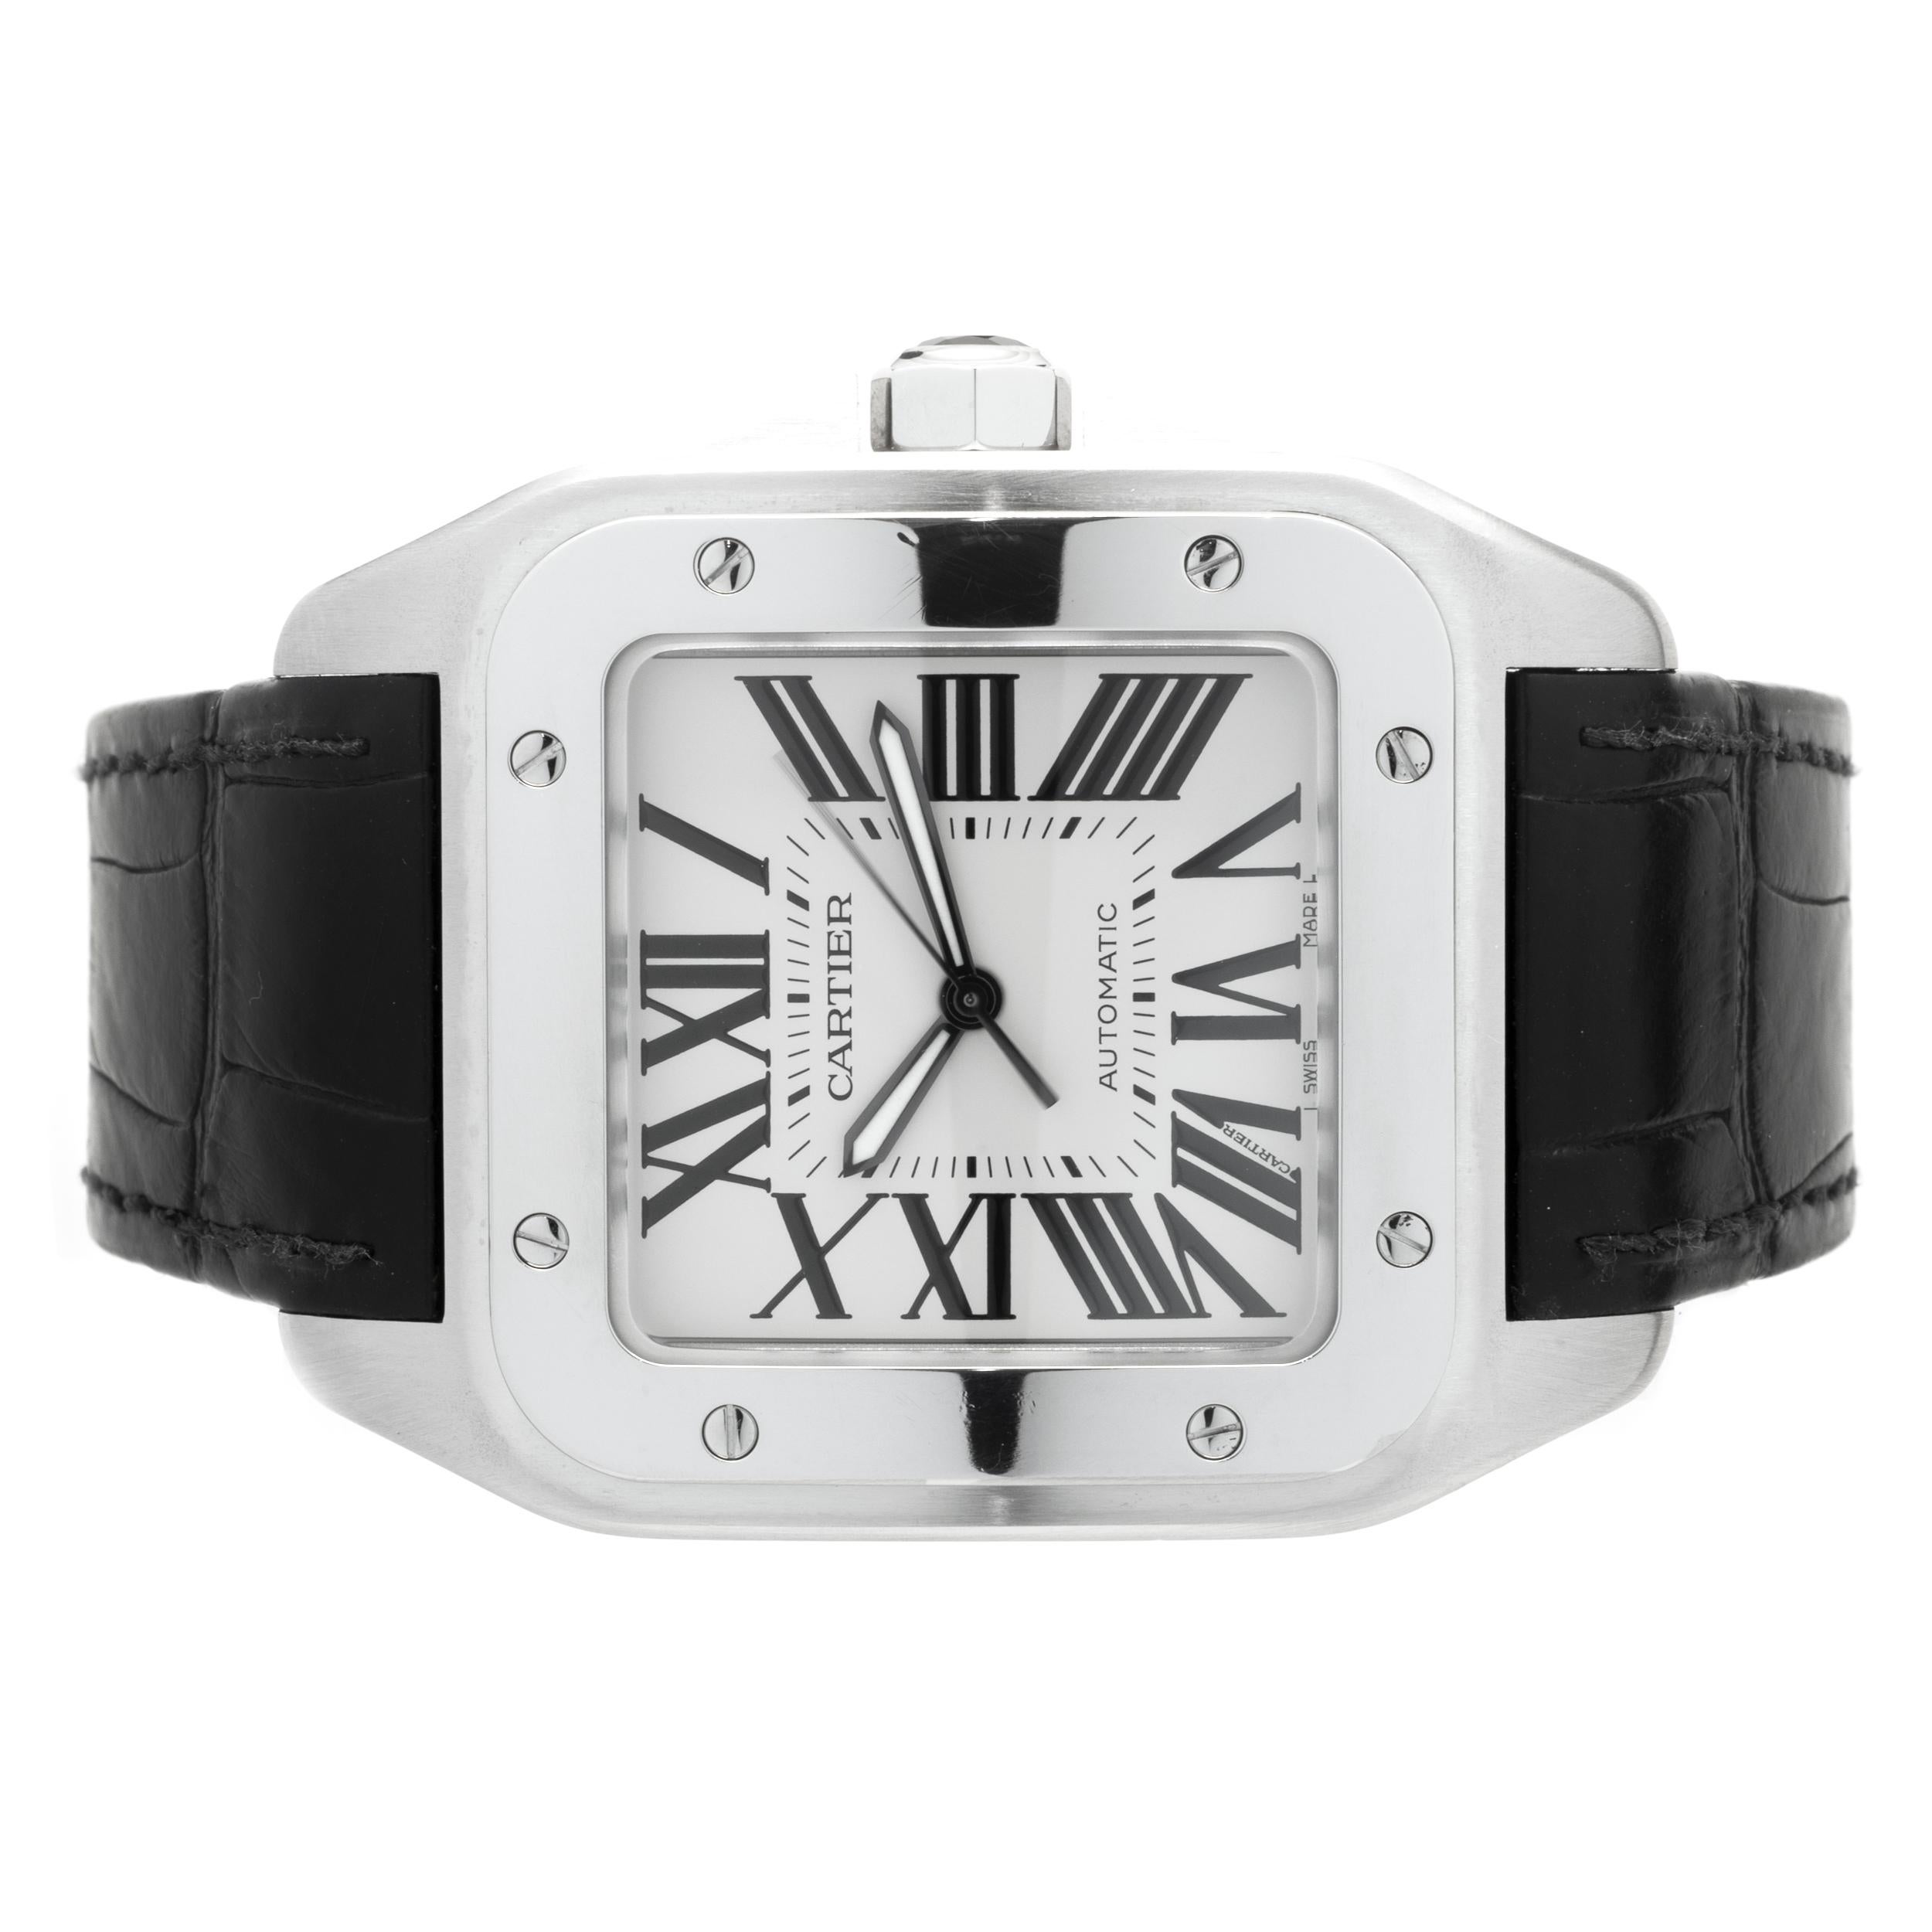 Movement: automatic
Function: hours, minutes, seconds, date
Case: 41mm stainless steel rectangle case, push-pull crown, sapphire crystal, 
Dial: silver roman dial, steel sword sweeping hands
Band: black leather Cartier panther bracelet, fold-over